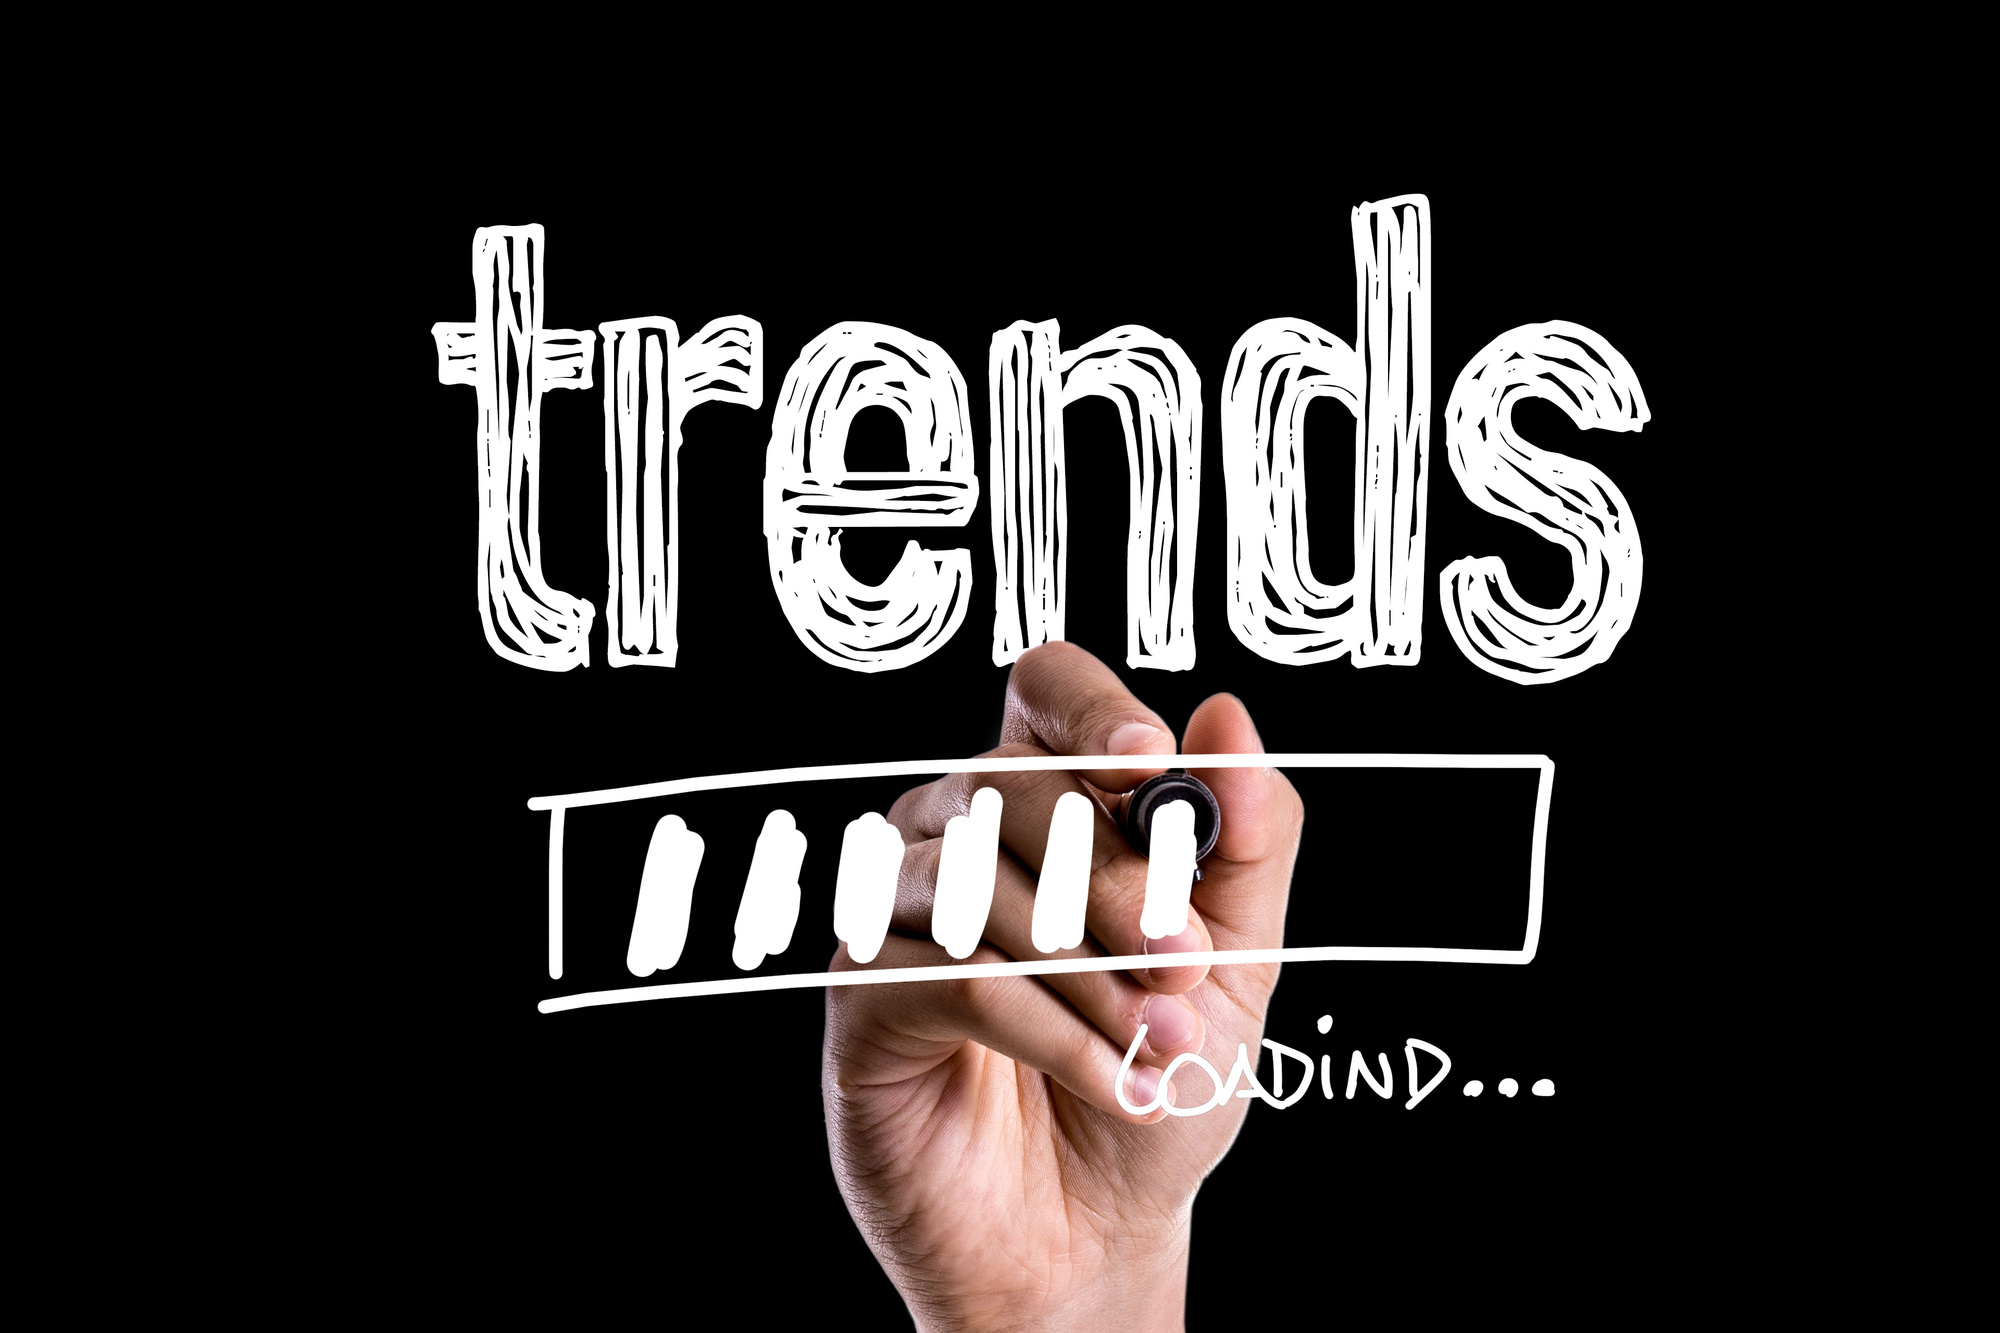 What Are the Key Website Trends for 2022?